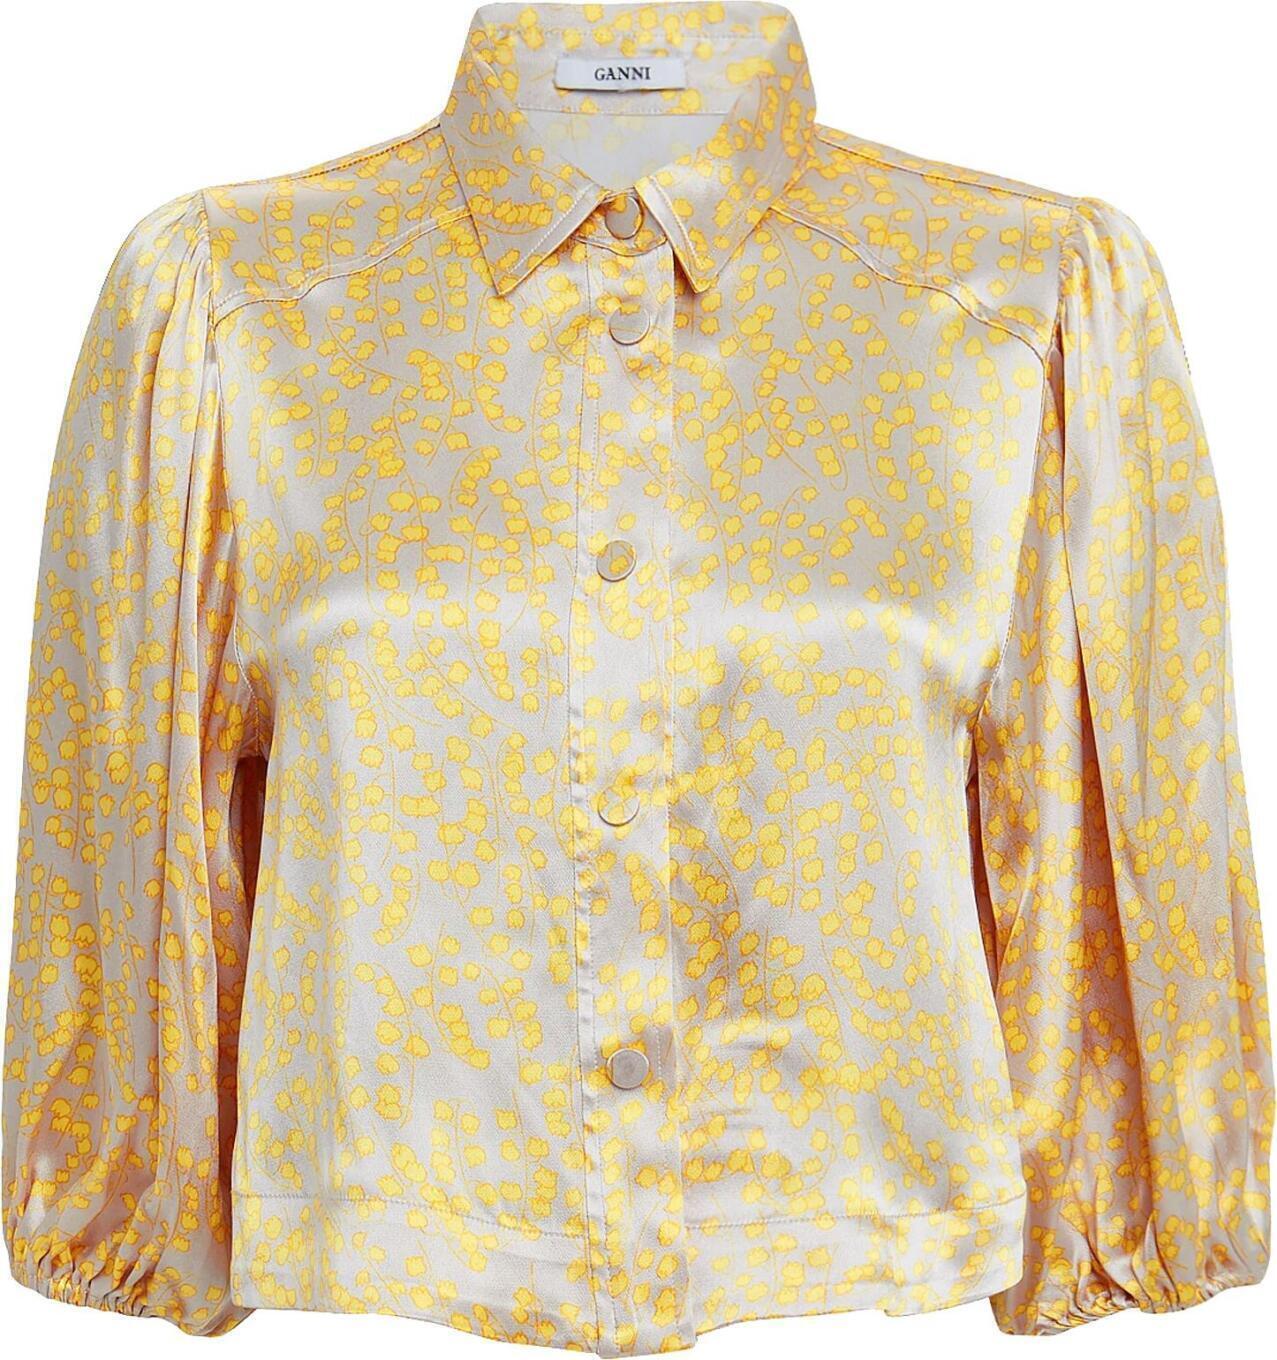 Blouse (Yellow Floral Satin) | style